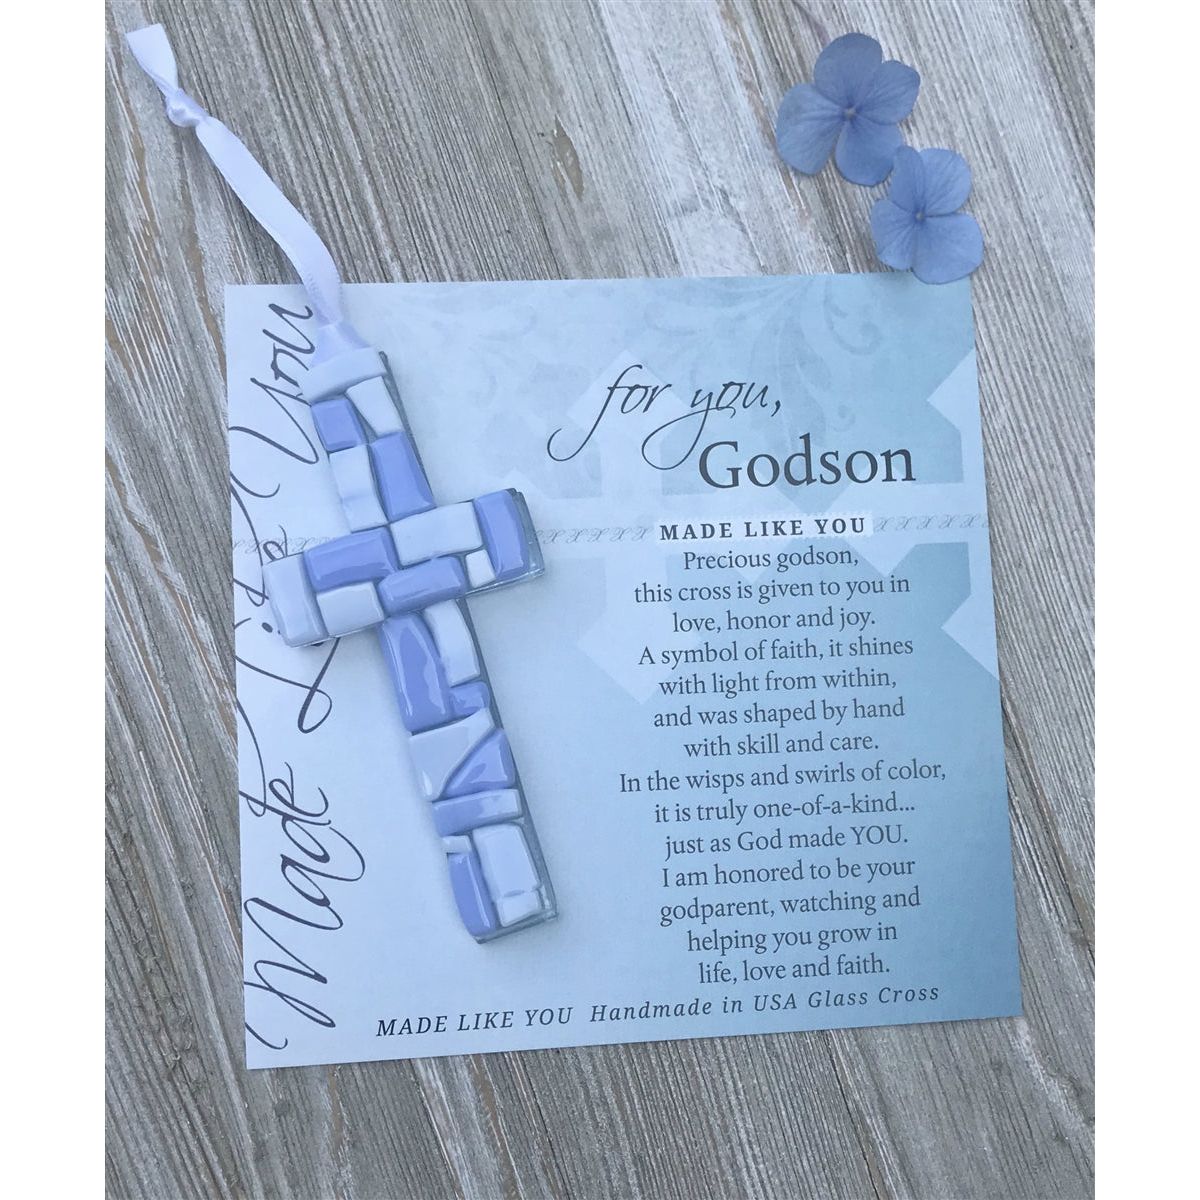 Blue Mosaic cross with shades of blue and white glass lying on the For You, Godson sentiment artwork.